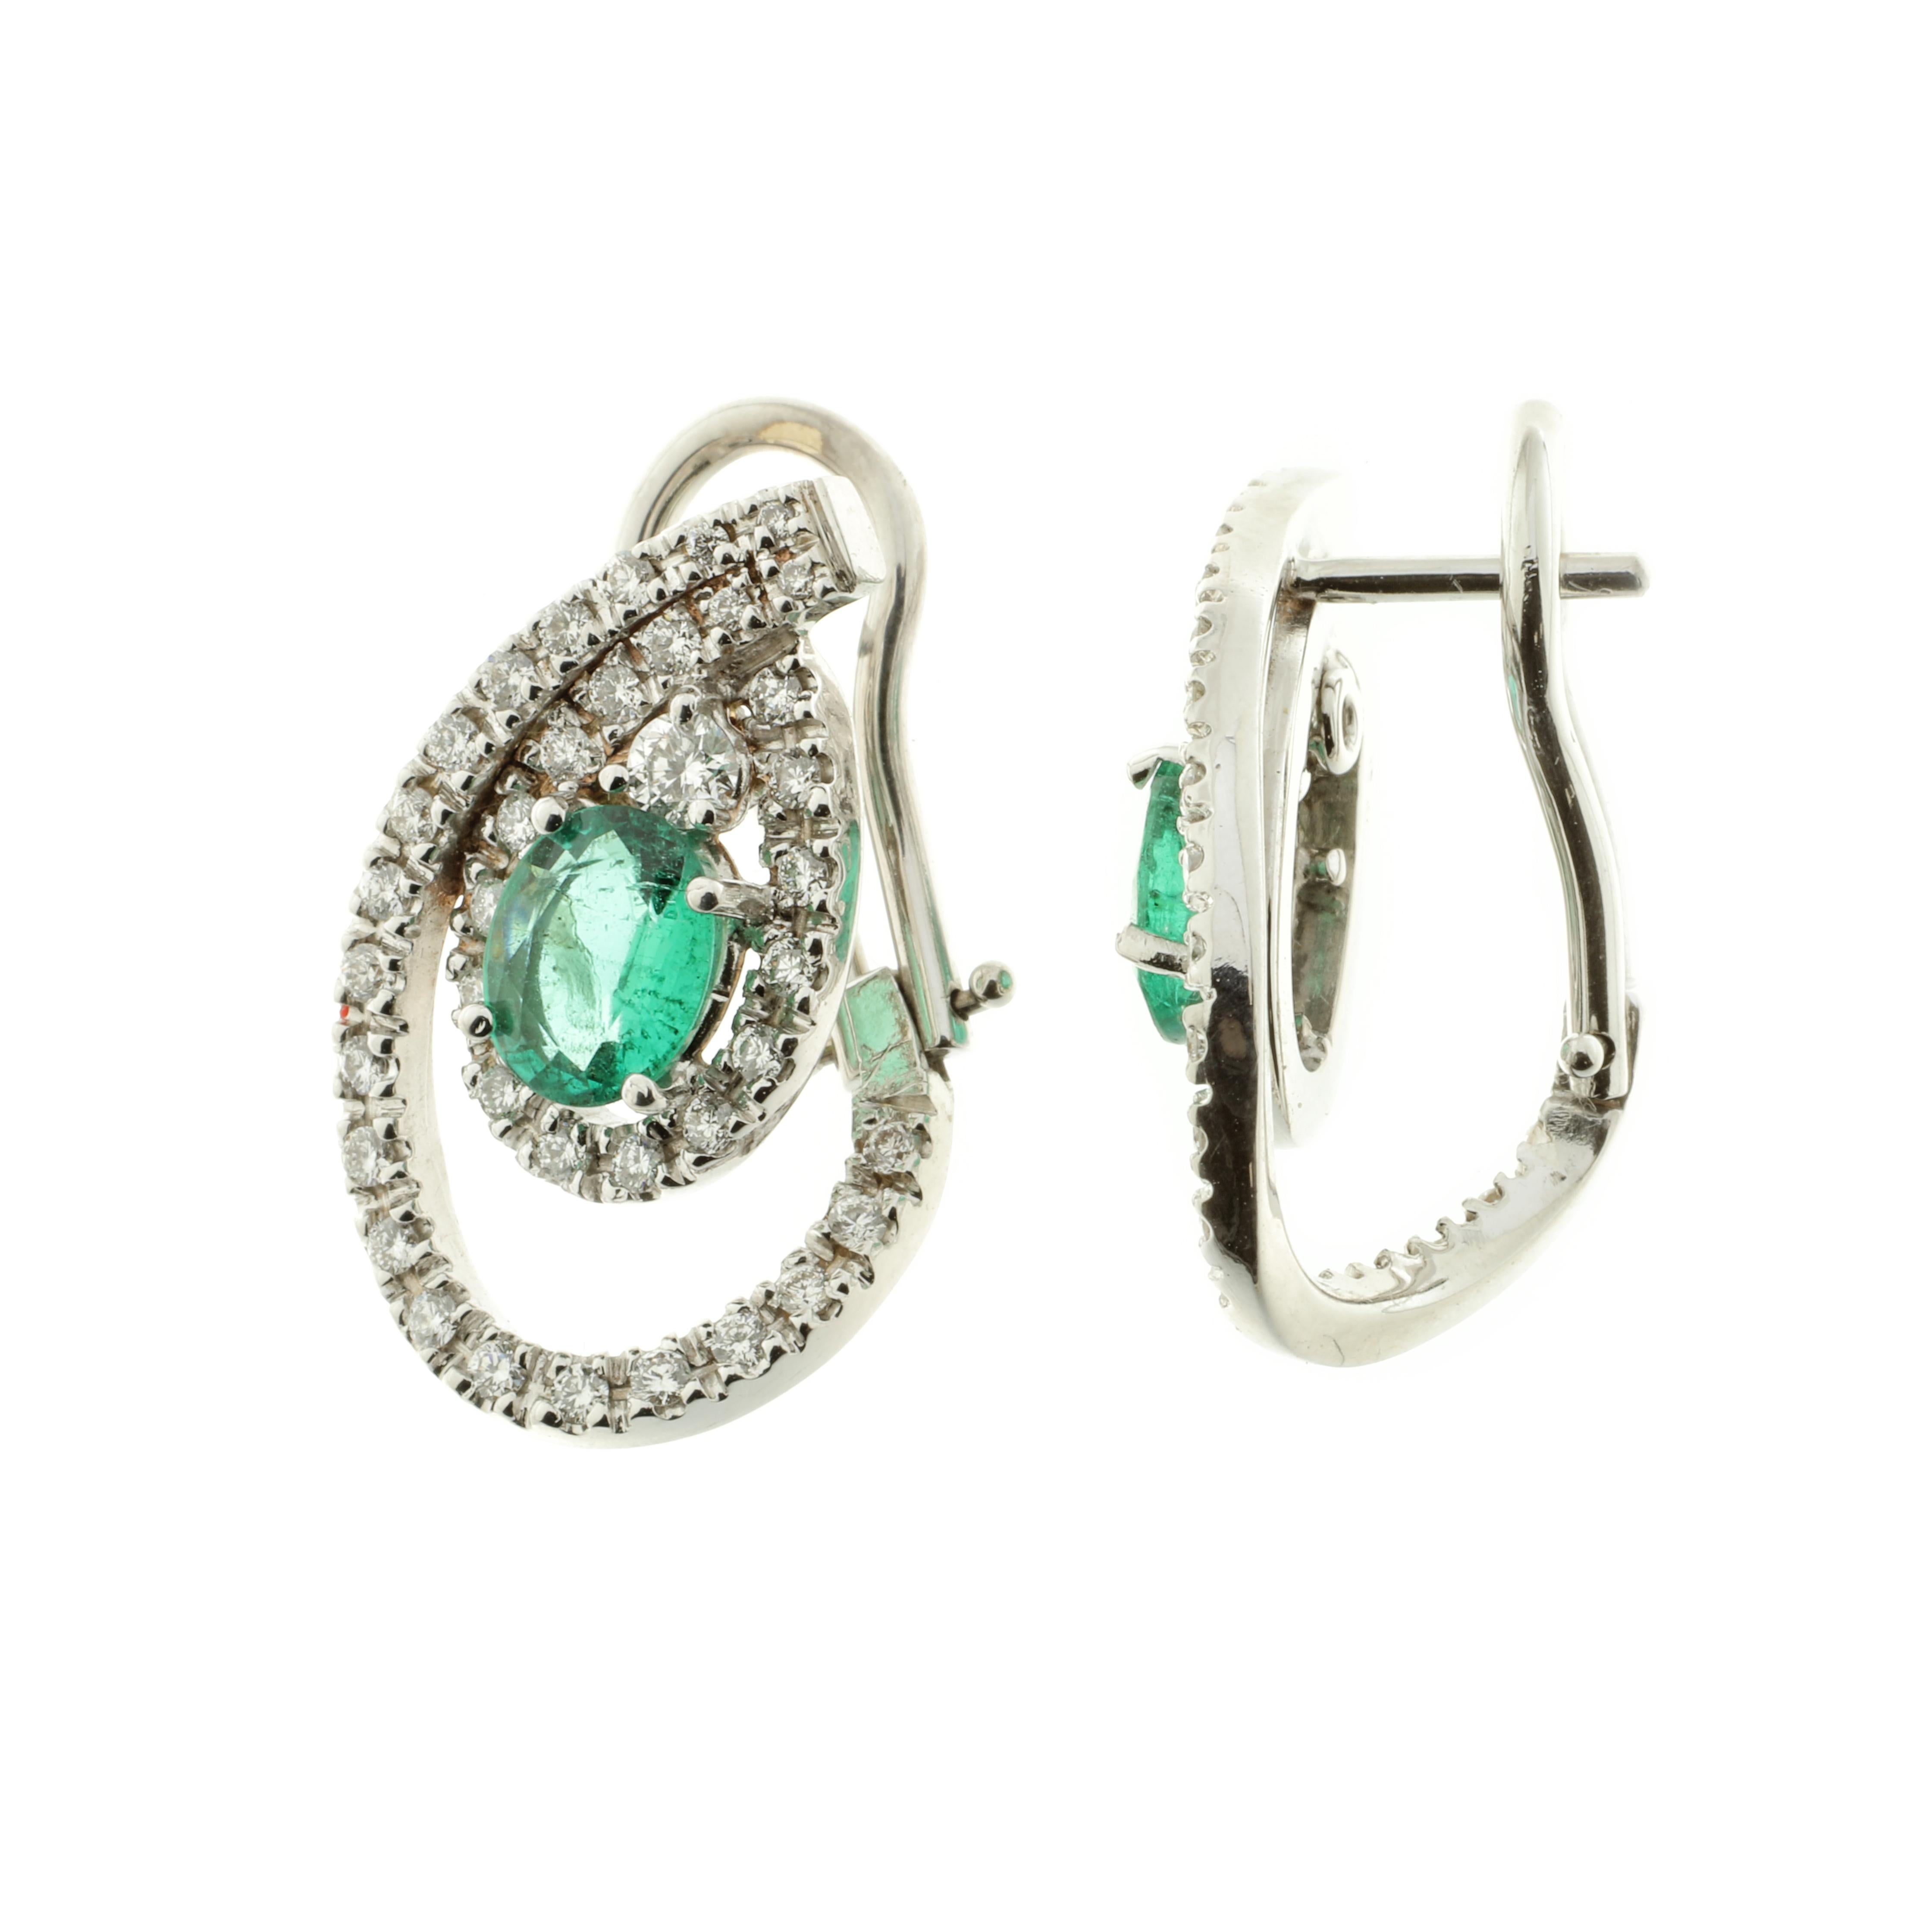 These beautiful pear-shaped earrings feature 18-karat white gold, white diamonds (rated G VS) and emeralds. Hand-made using traditional methods, this singular piece has been designed and produced in Palermo, Sicily by master jewellers. 

The